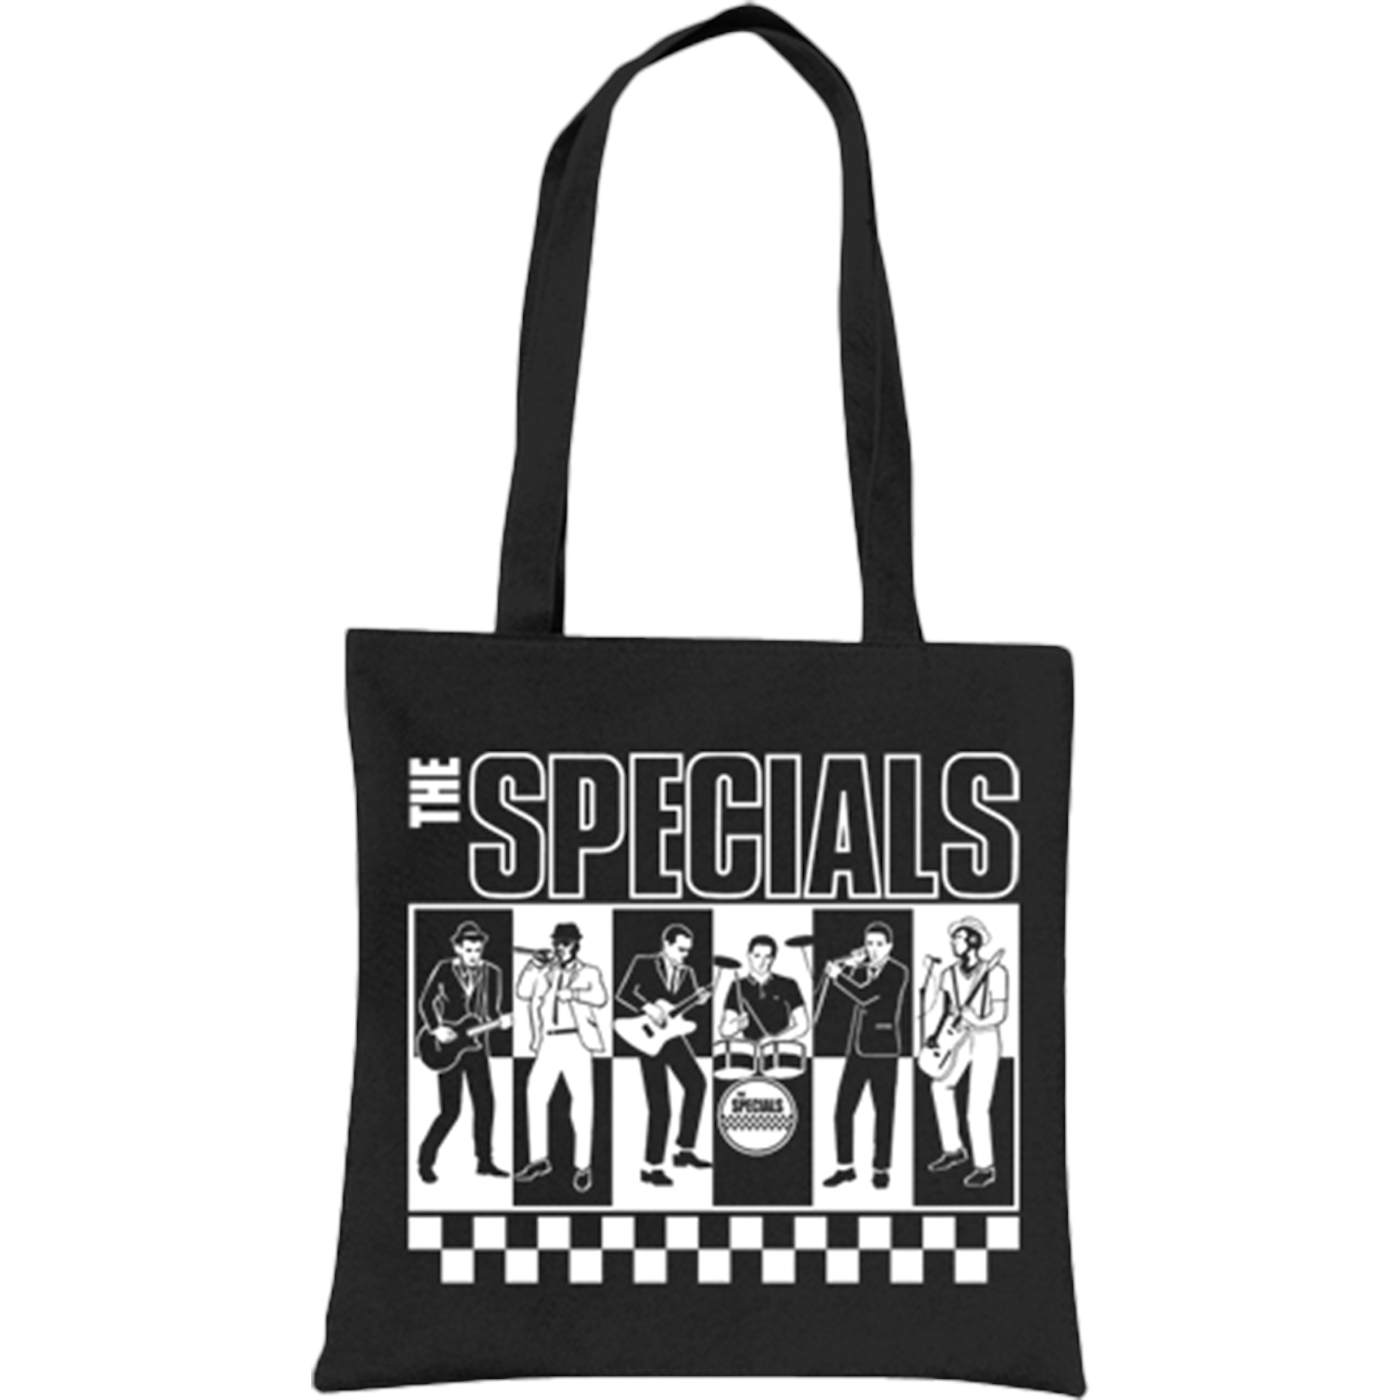 The Specials "BW" Black Tote